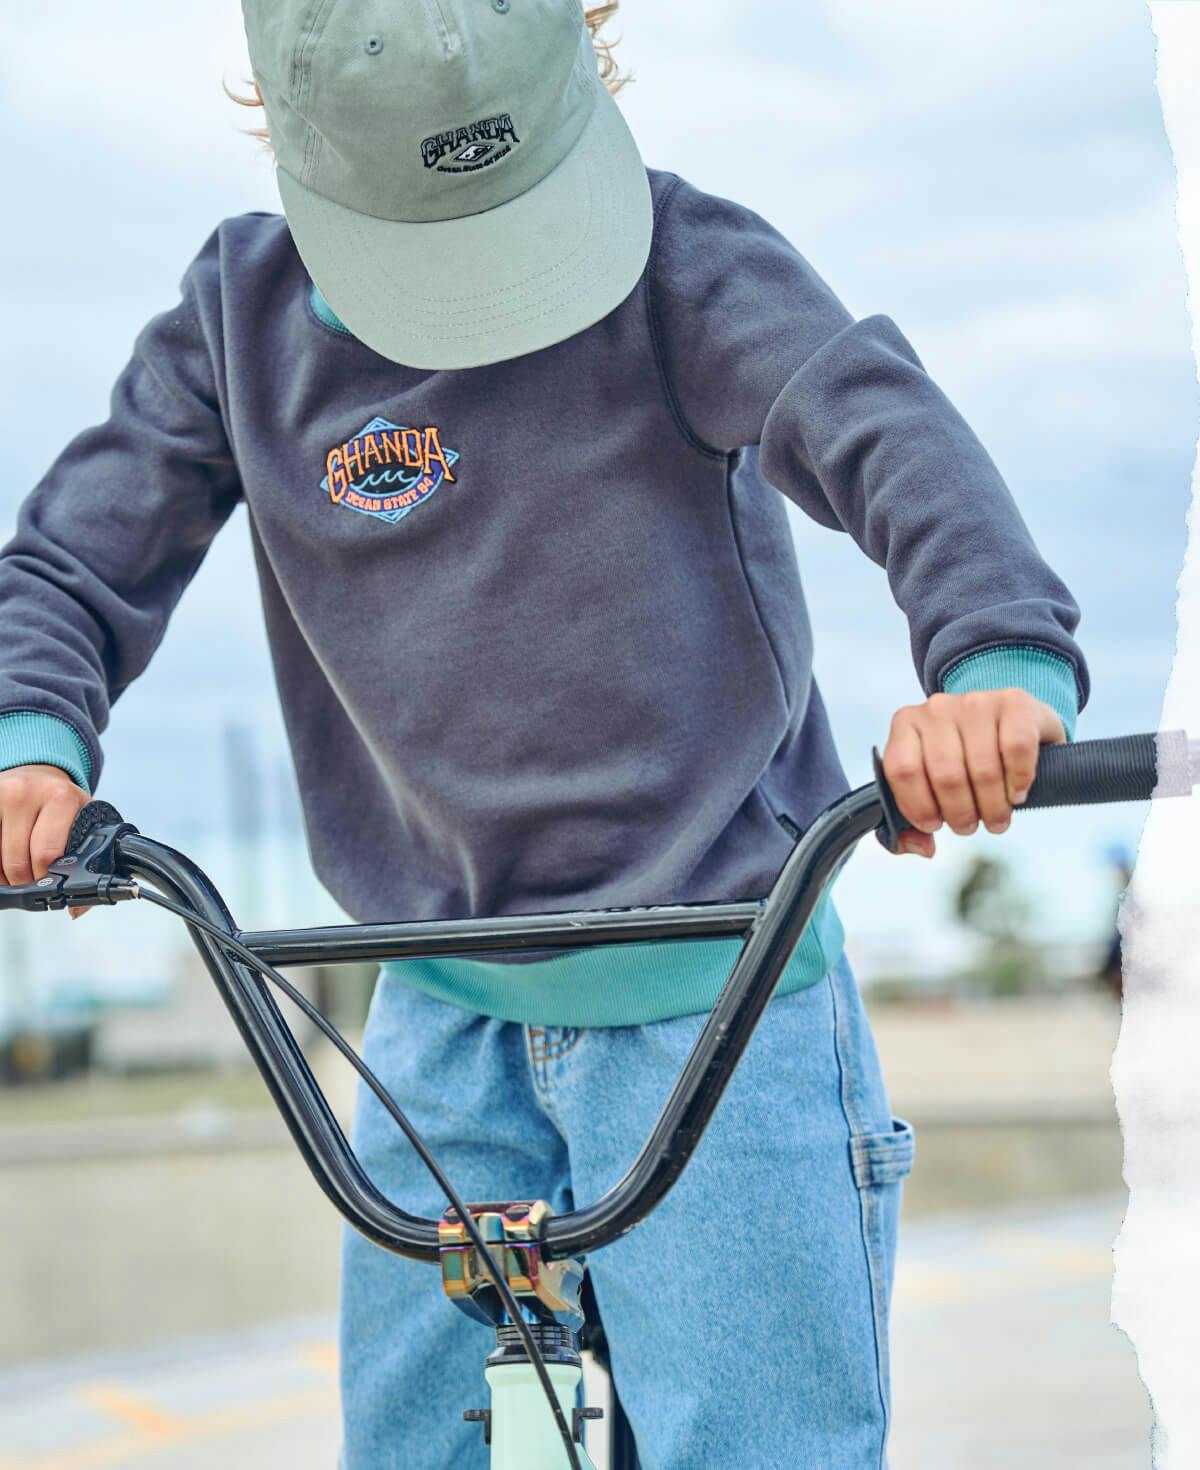 Image of young boy at the skate park on a bike. He is wearing denim jeans a ghanda embroidered panel crew and washed jade coloured cap